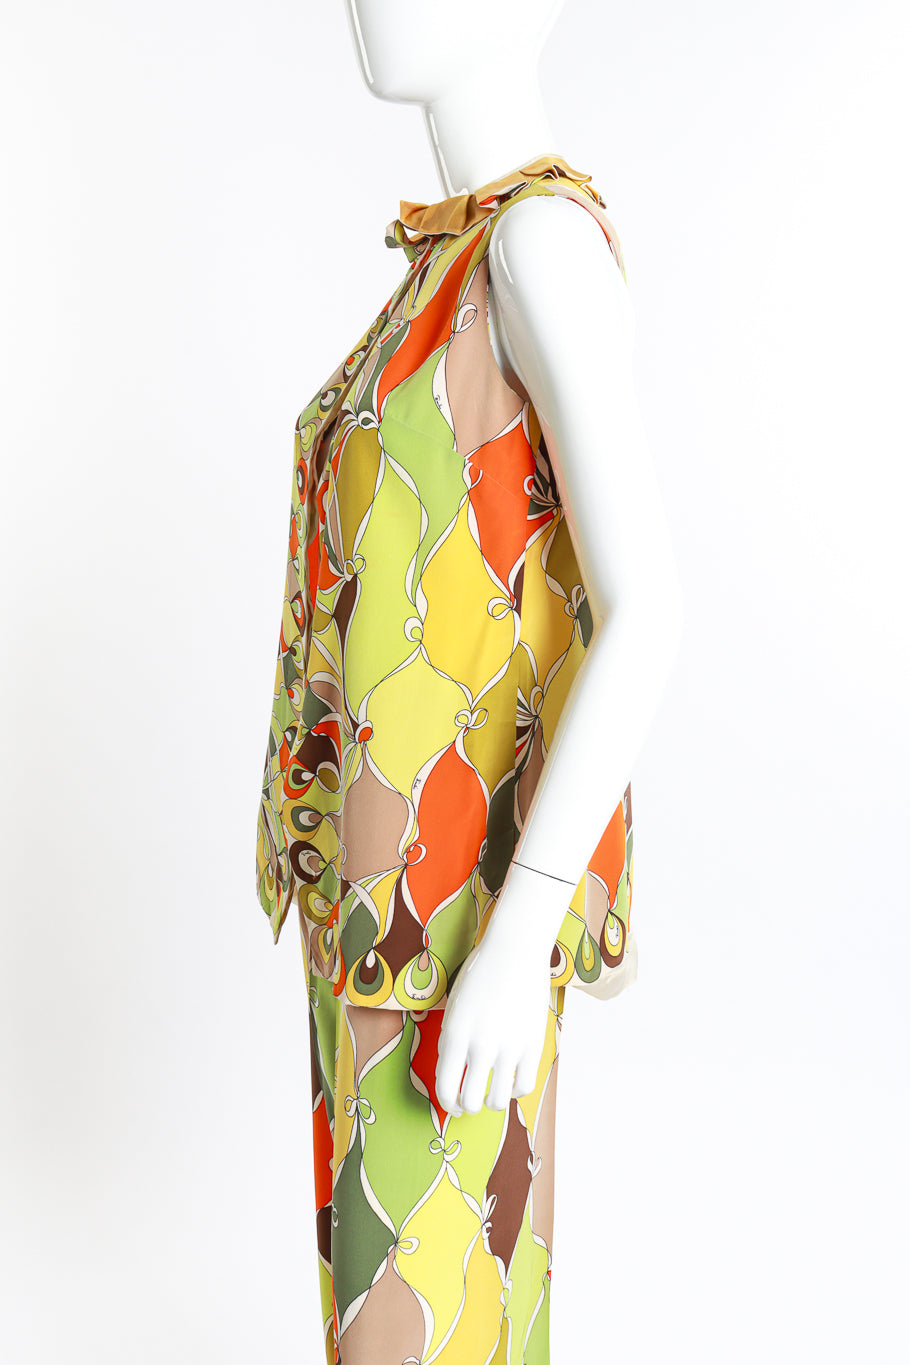 Vintage Emilio Pucci ruffle tunic high waisted trouser set left side view as seen on mannequin @RECESS LA